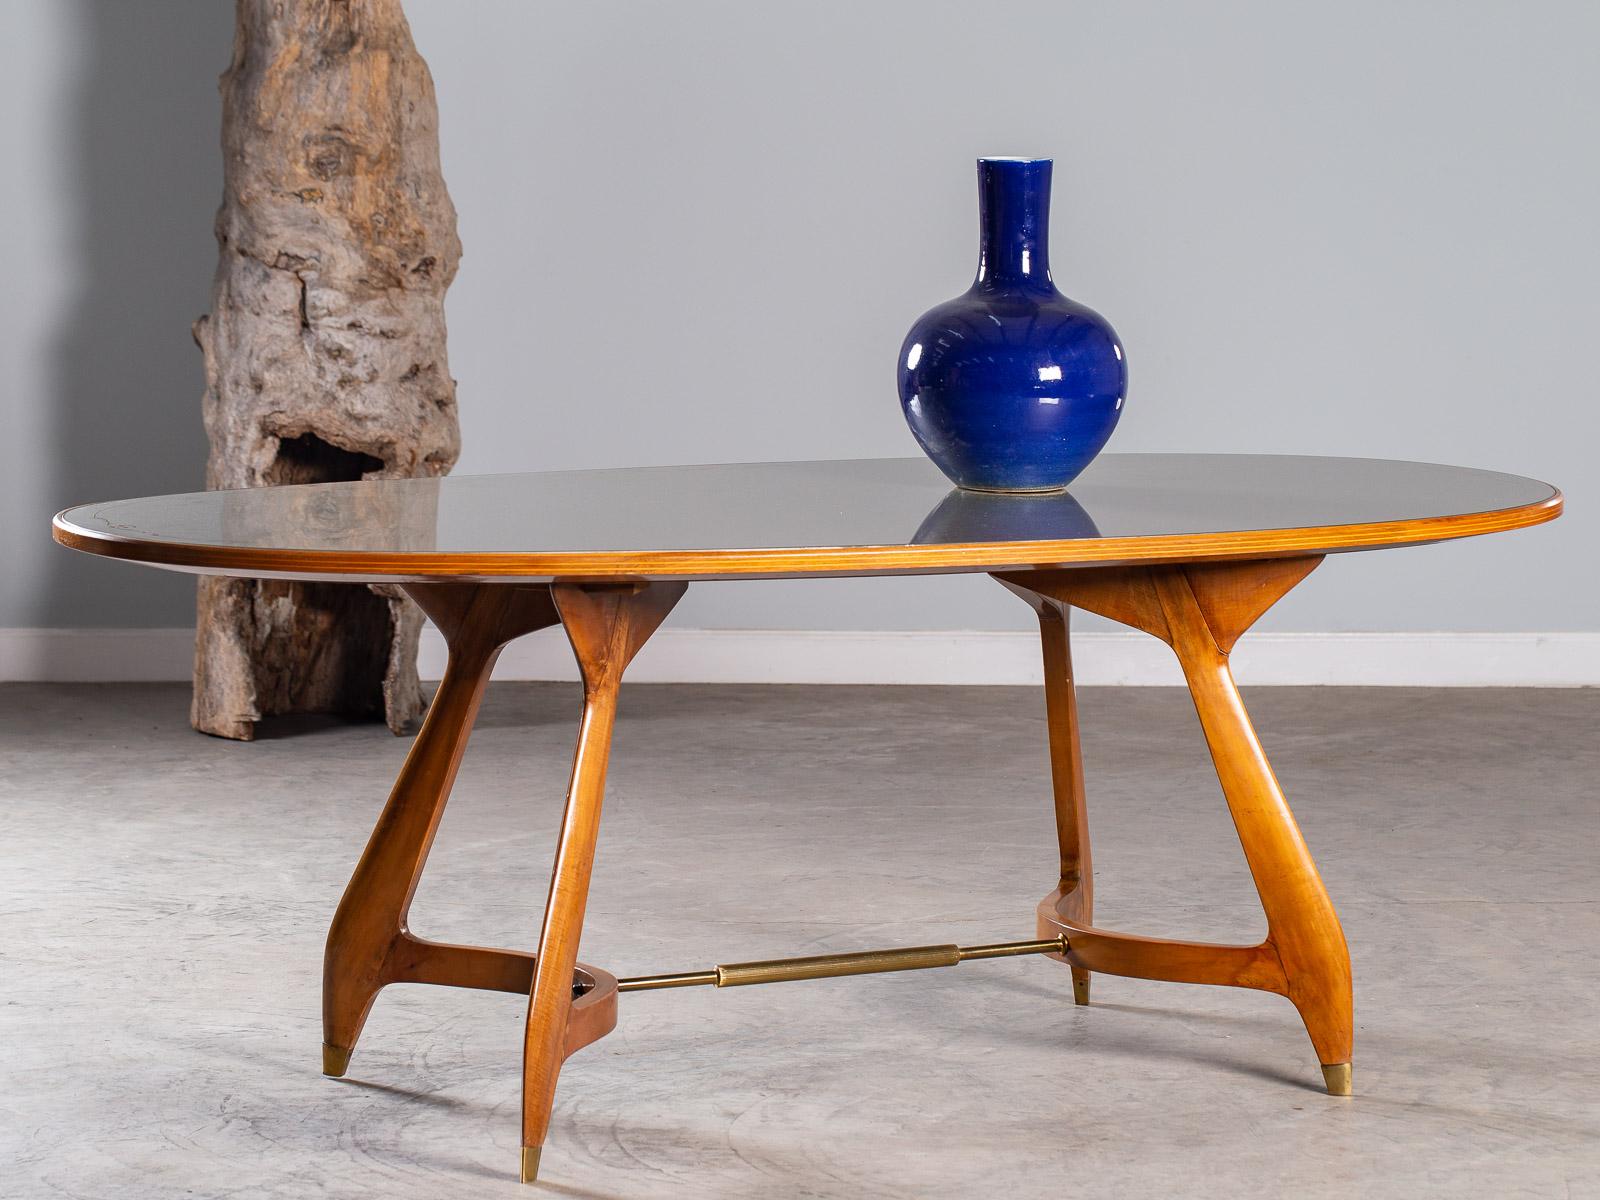 A truly one of a kind vintage Italian oval maple table attributed to Ico Parisi or Gio Ponti, circa 1950 having a celadon green reverse painted glass top. Please enlarge the photographs to see the unique details that give this table its connection